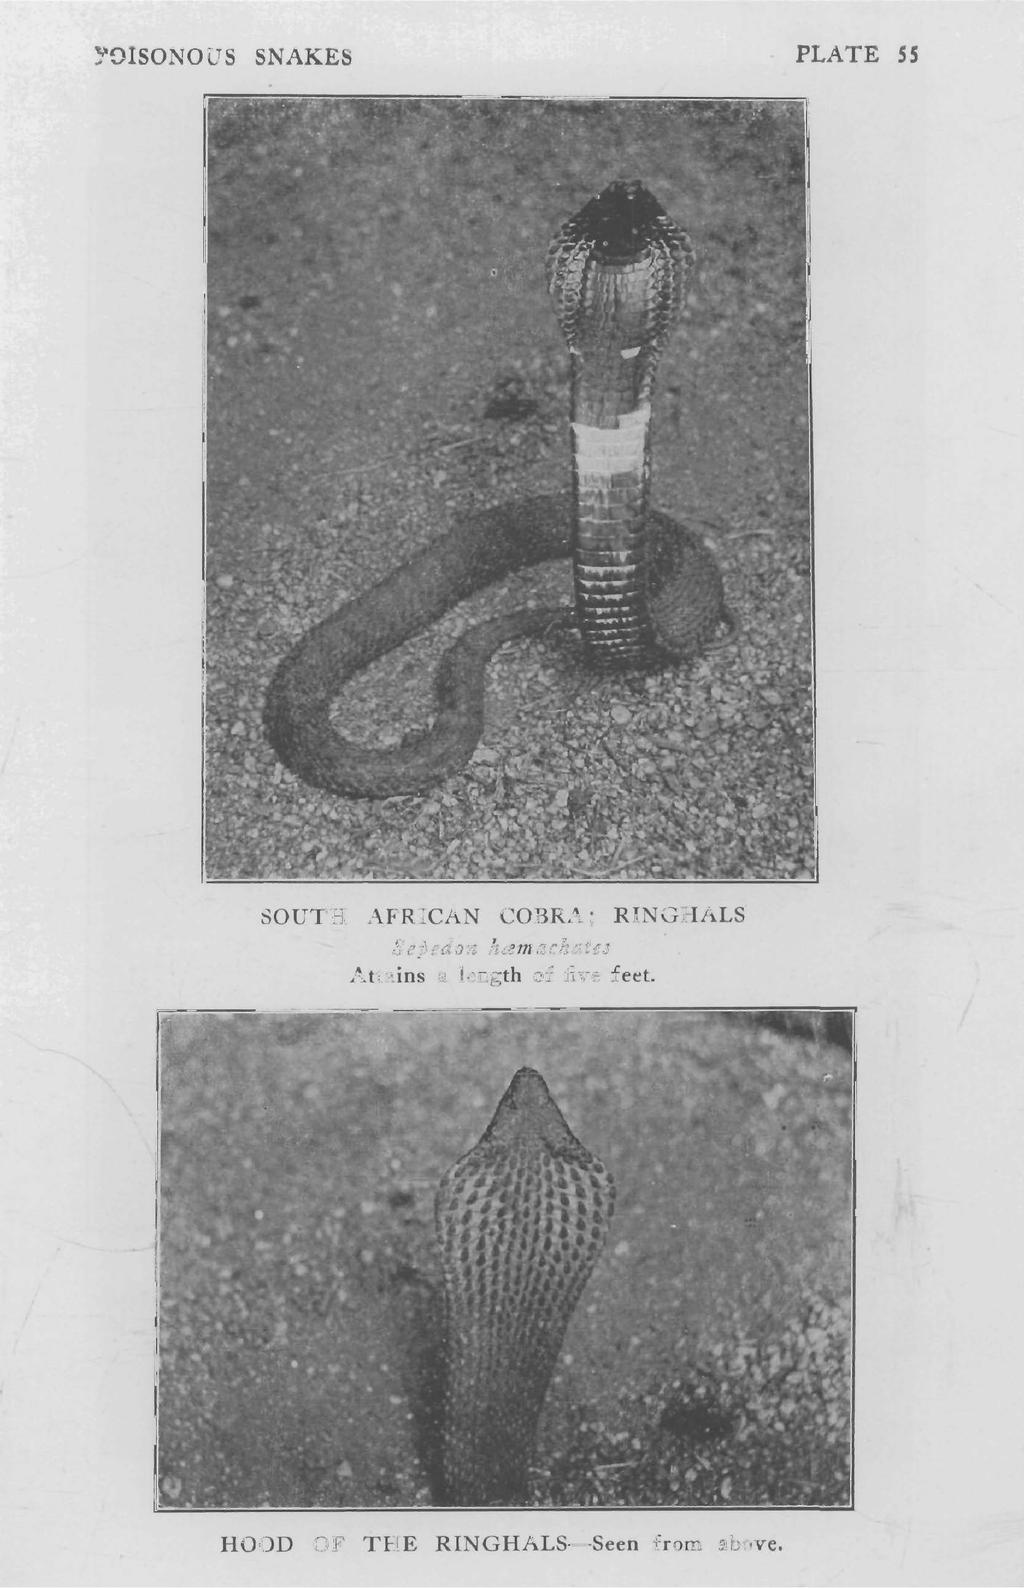 ~'0ISONOUS SNAKES PLATE S5 SOUTH AFRICAN COBRA; RINGHALS Seprdon